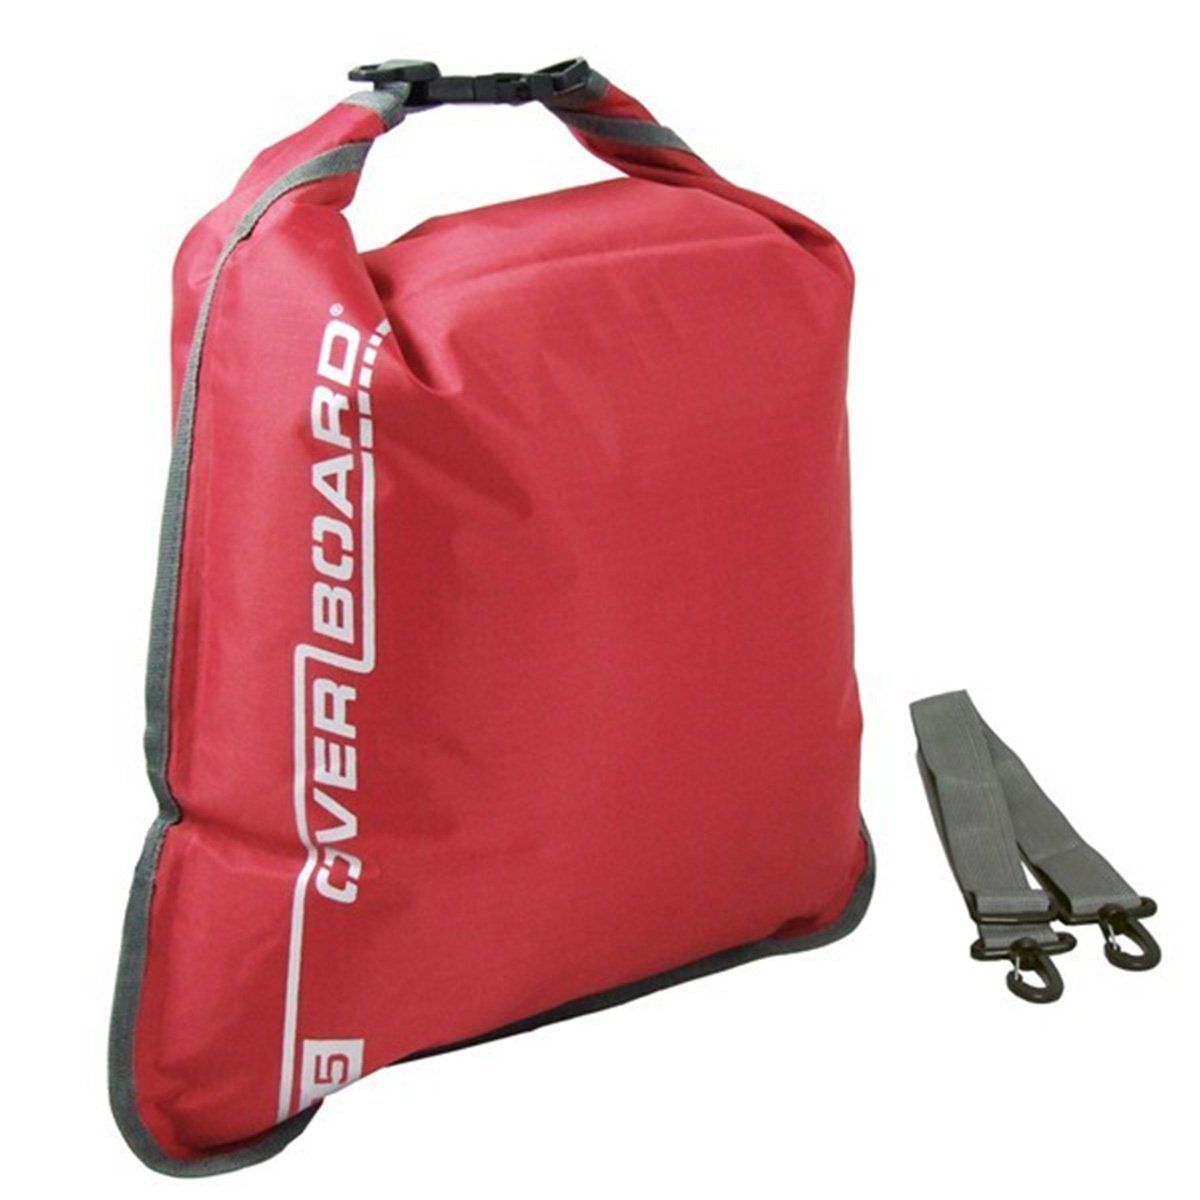 Overboard 15 Litre Dry Flat Bag Bags, Packs and Cases Overboard Red Tactical Gear Supplier Tactical Distributors Australia